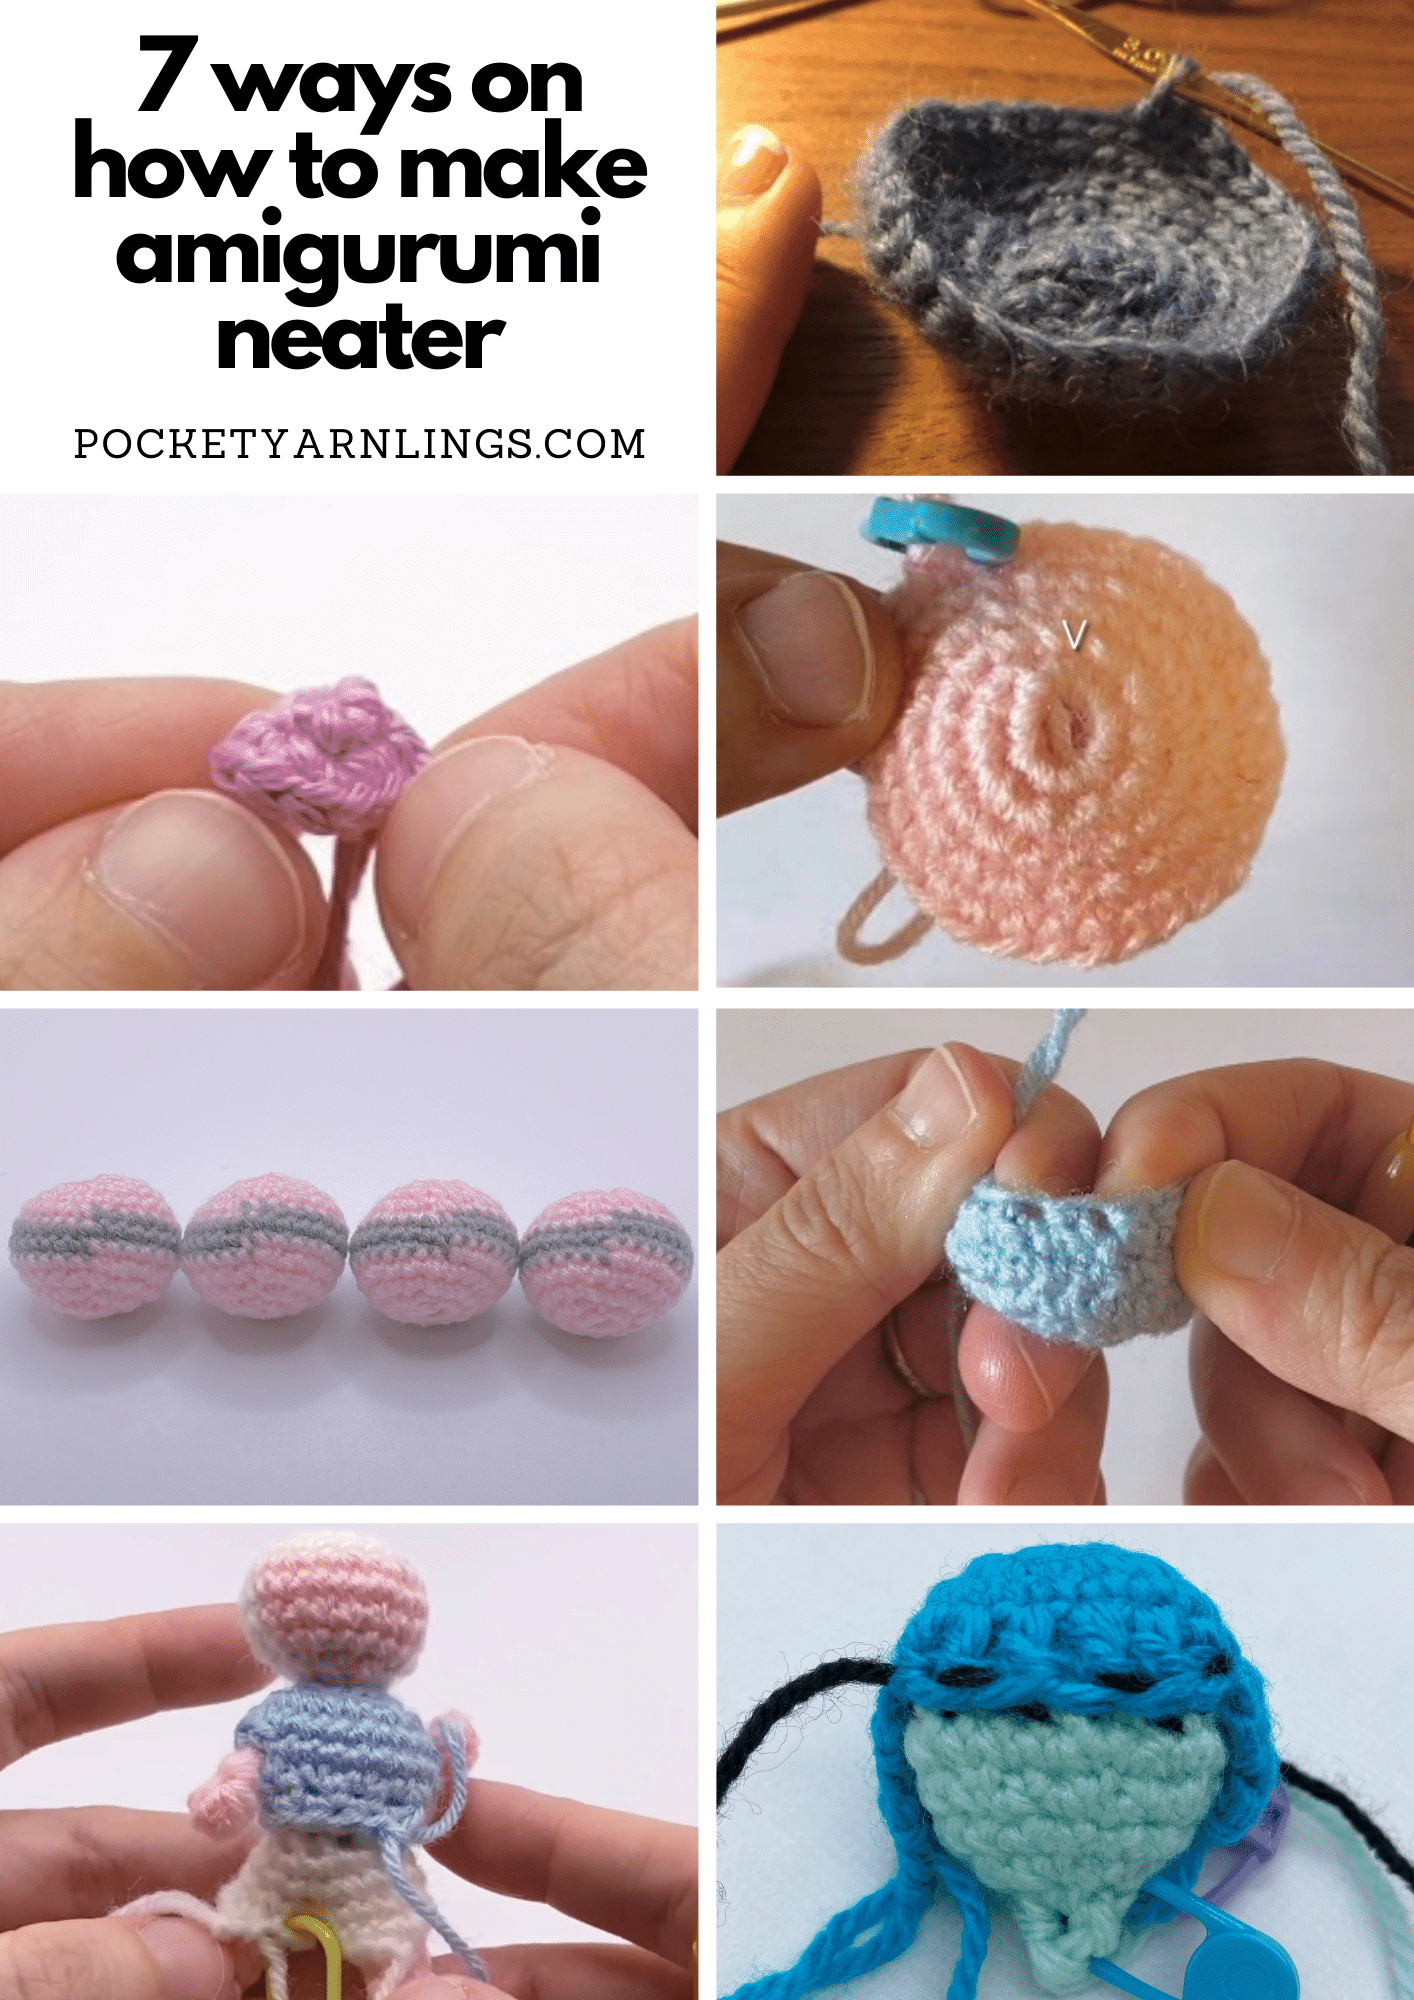 How to block crochet: Technique to neaten your crochet projects